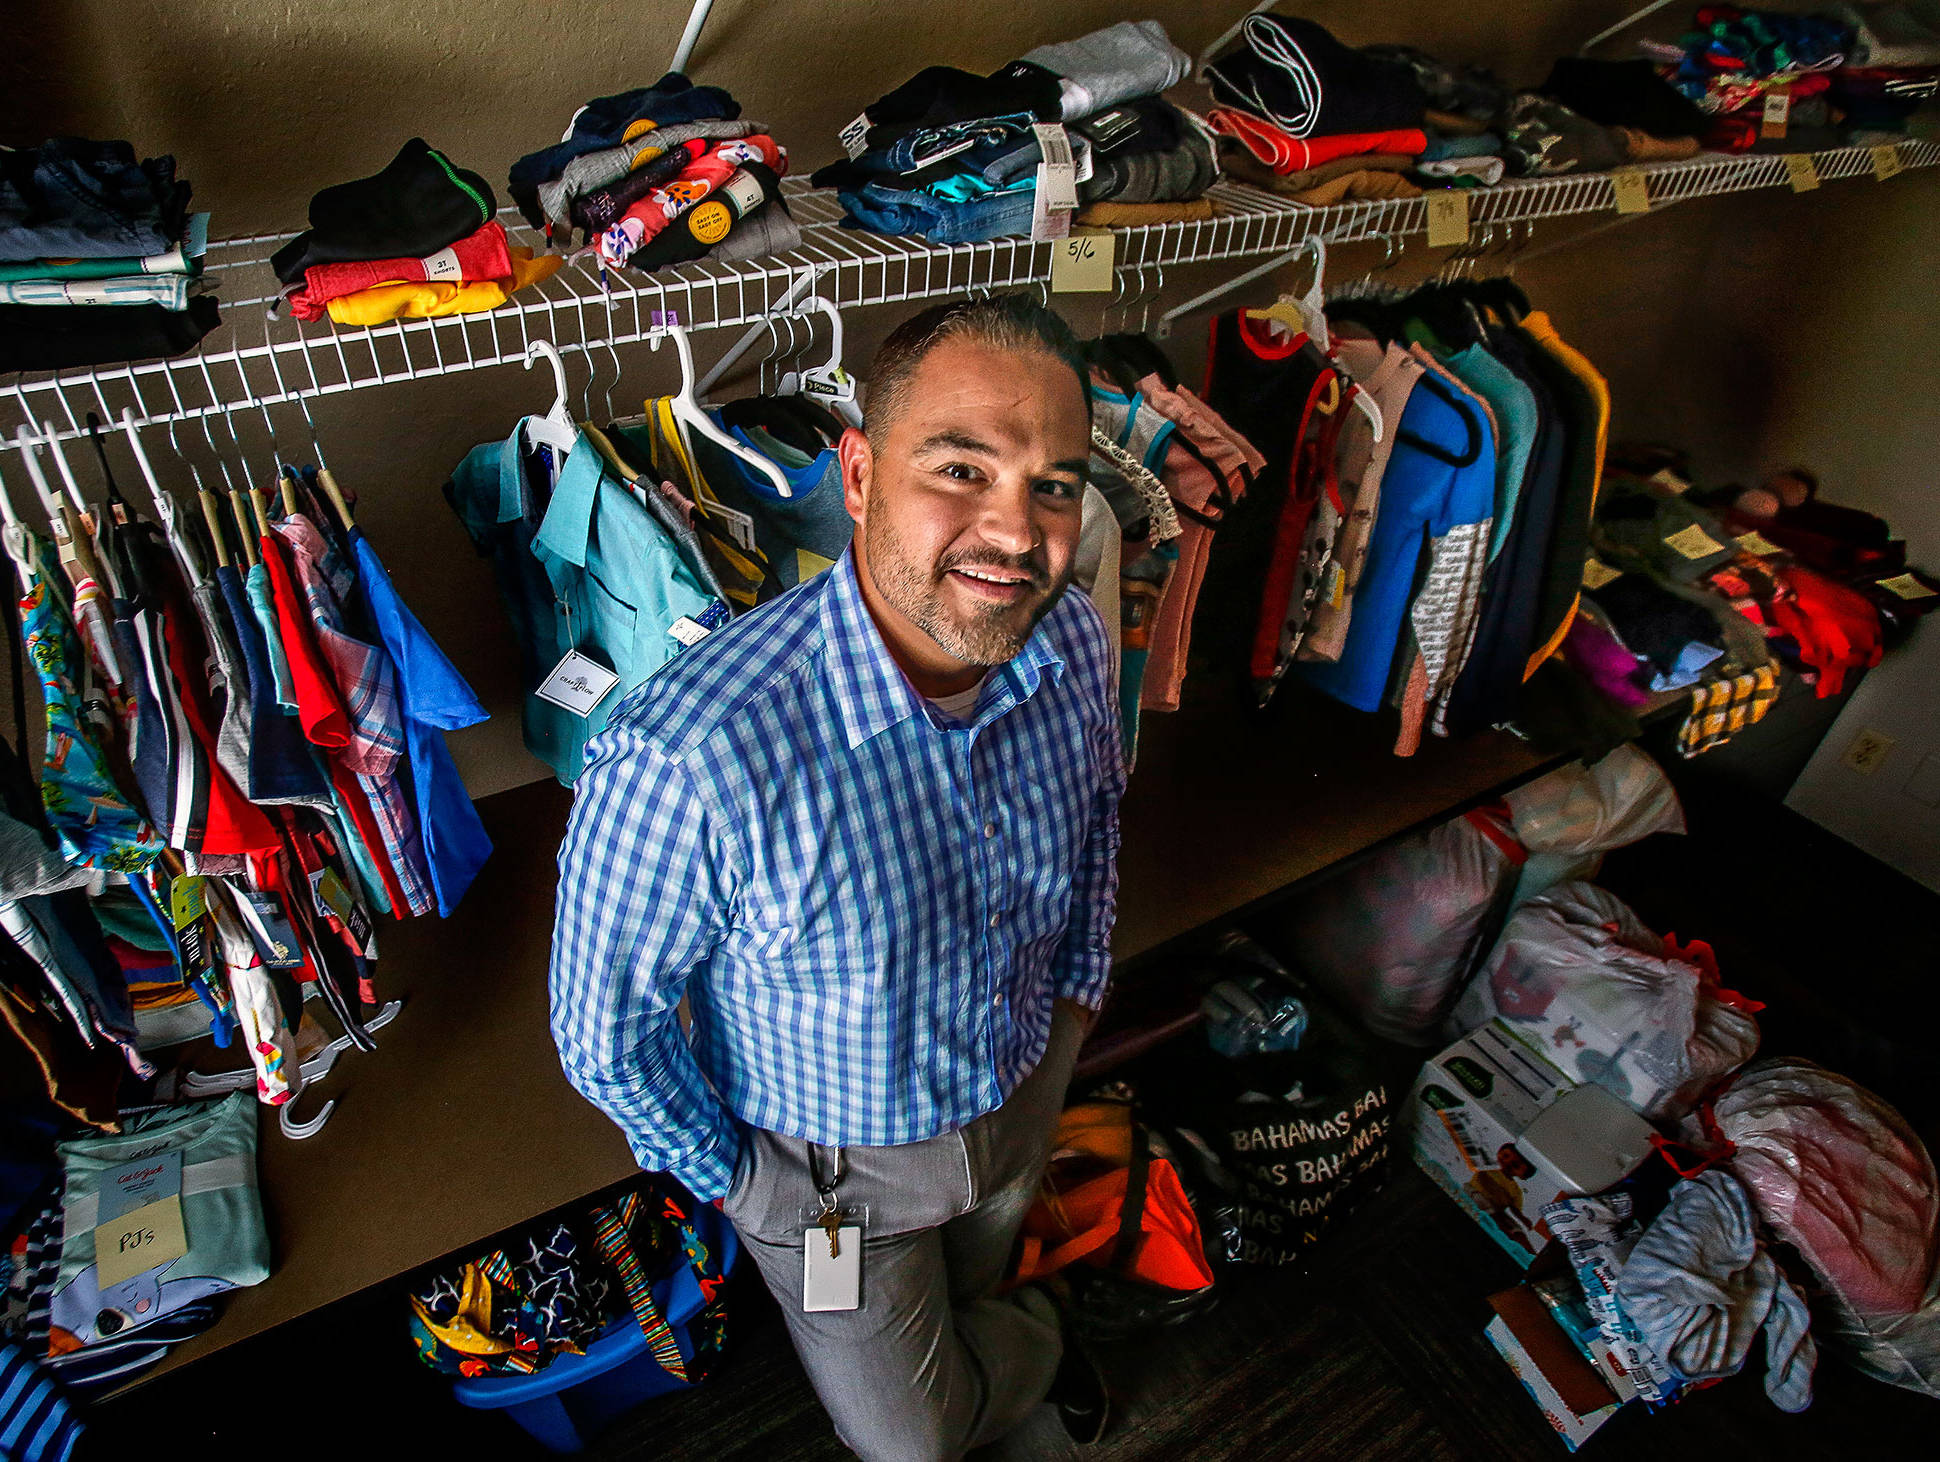 Jay Priebe, who grew up in foster care, is chief executive officer of Hand in Hand. The nonprofit operates Safe Place, an Everett facility that houses children removed from homes by law enforcement or social workers. (Dan Bates / The Herald)